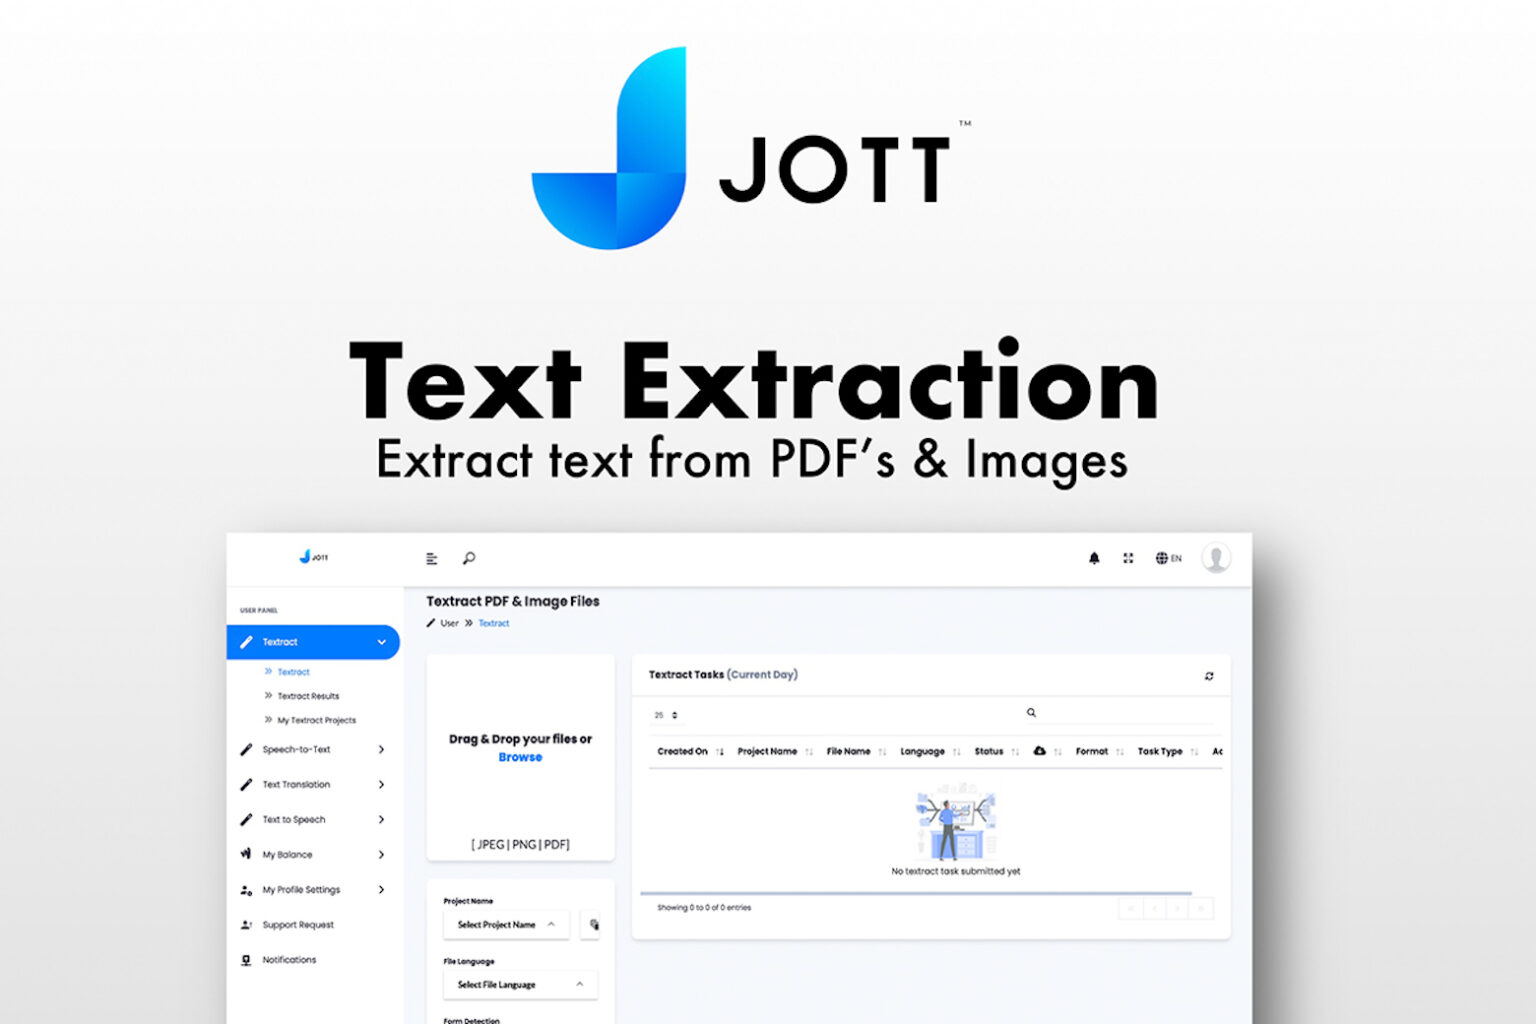 Don't miss $170 in savings on lifetime access to the Jott Pro AI Text and Speech Toolkit.